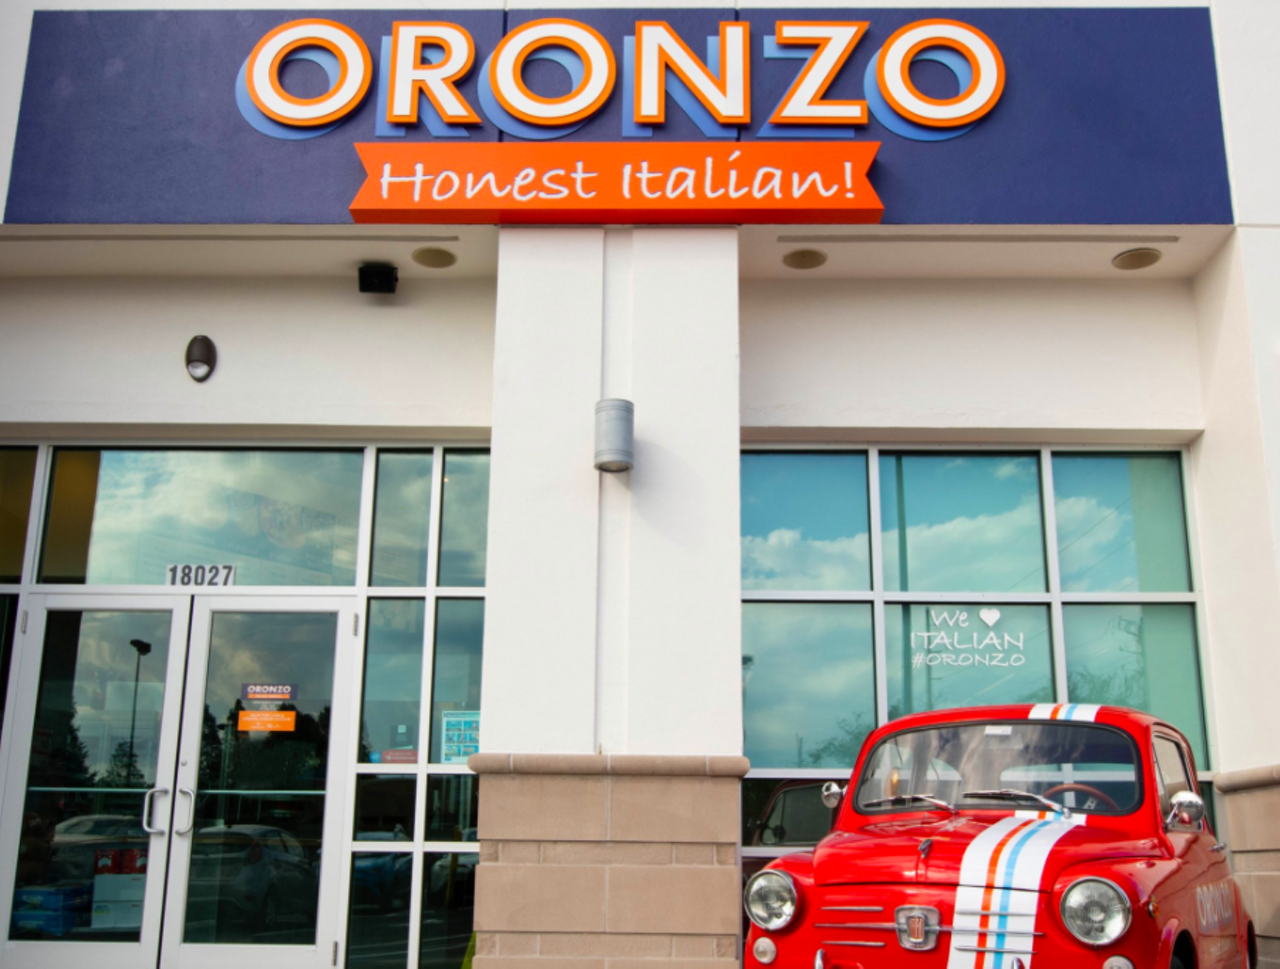 Oronzo Honest Italian
18027 Highwoods Preserve Pkwy., Tampa, 813-730-0100 
The fast-casual Oronzo Honest Italian boasts a loaded menu filled with Italian soups, salads, pizzas and their &#145;Italian burritos.&#146; Oronzo also incorporates options for dietary restrictions like gluten-free noodles and vegan dishes. 
Photo via Oronzo Honest Italian/Facebook